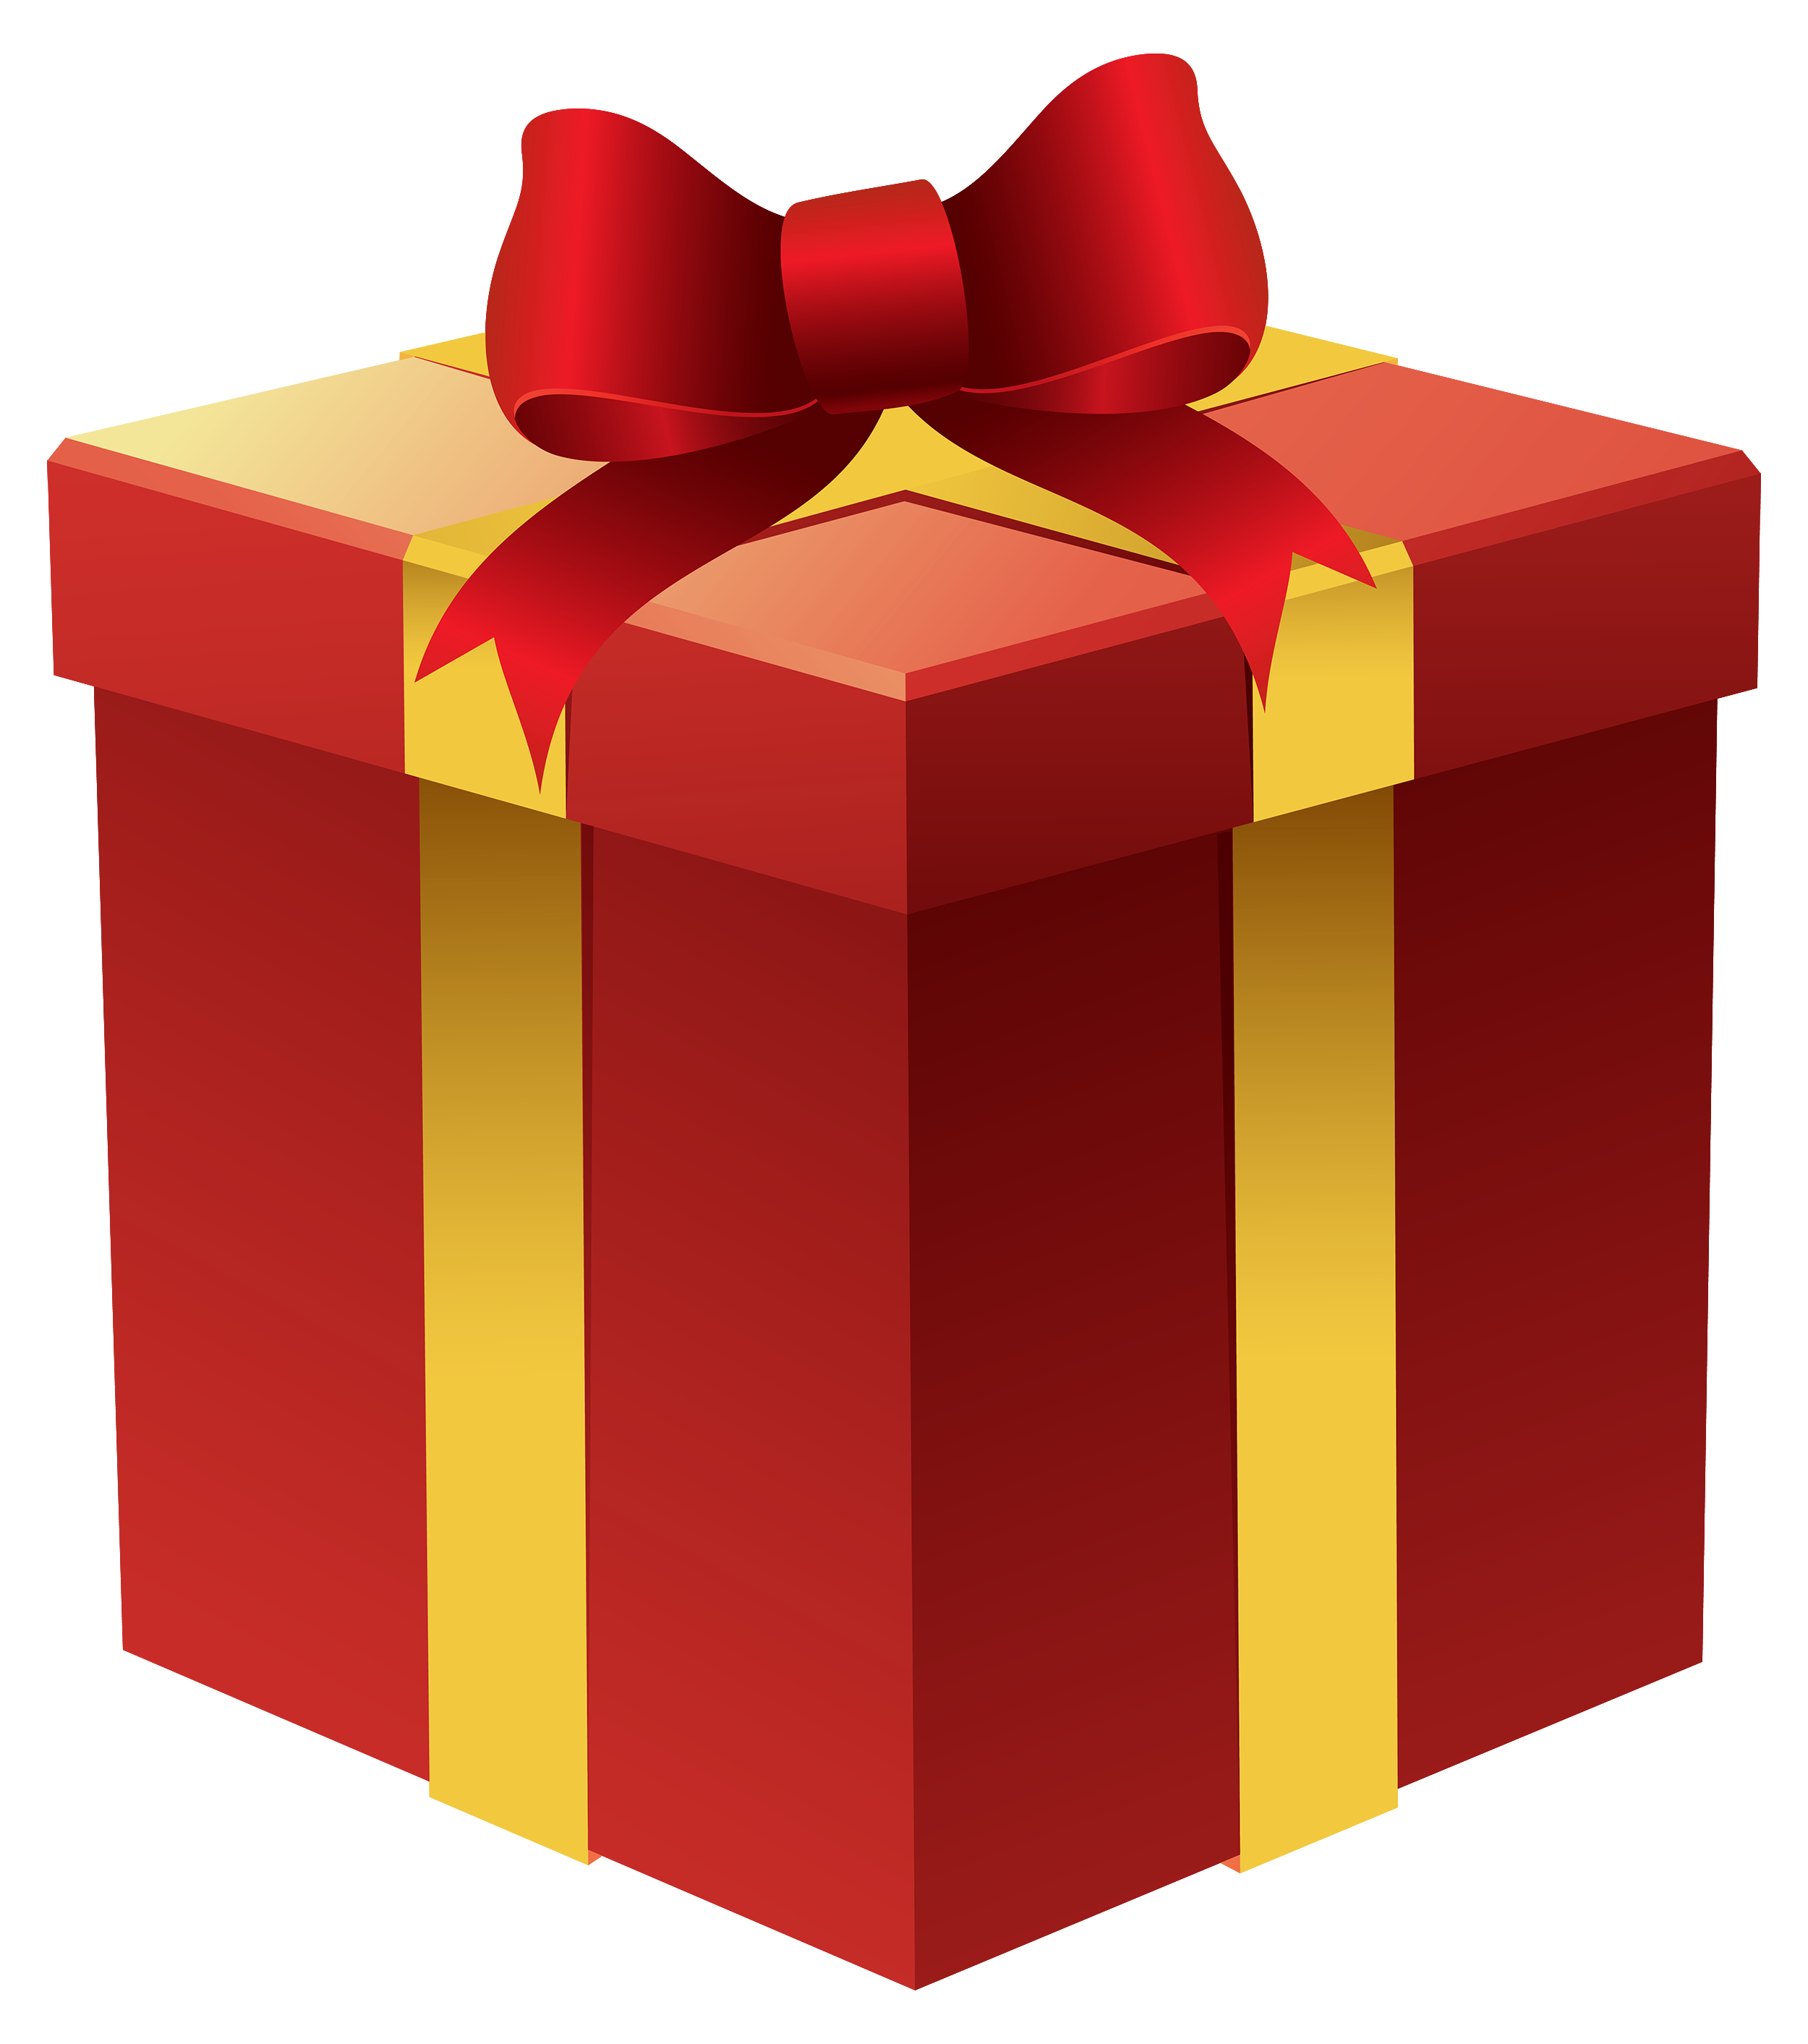 regalos gifts clipart download image #39902